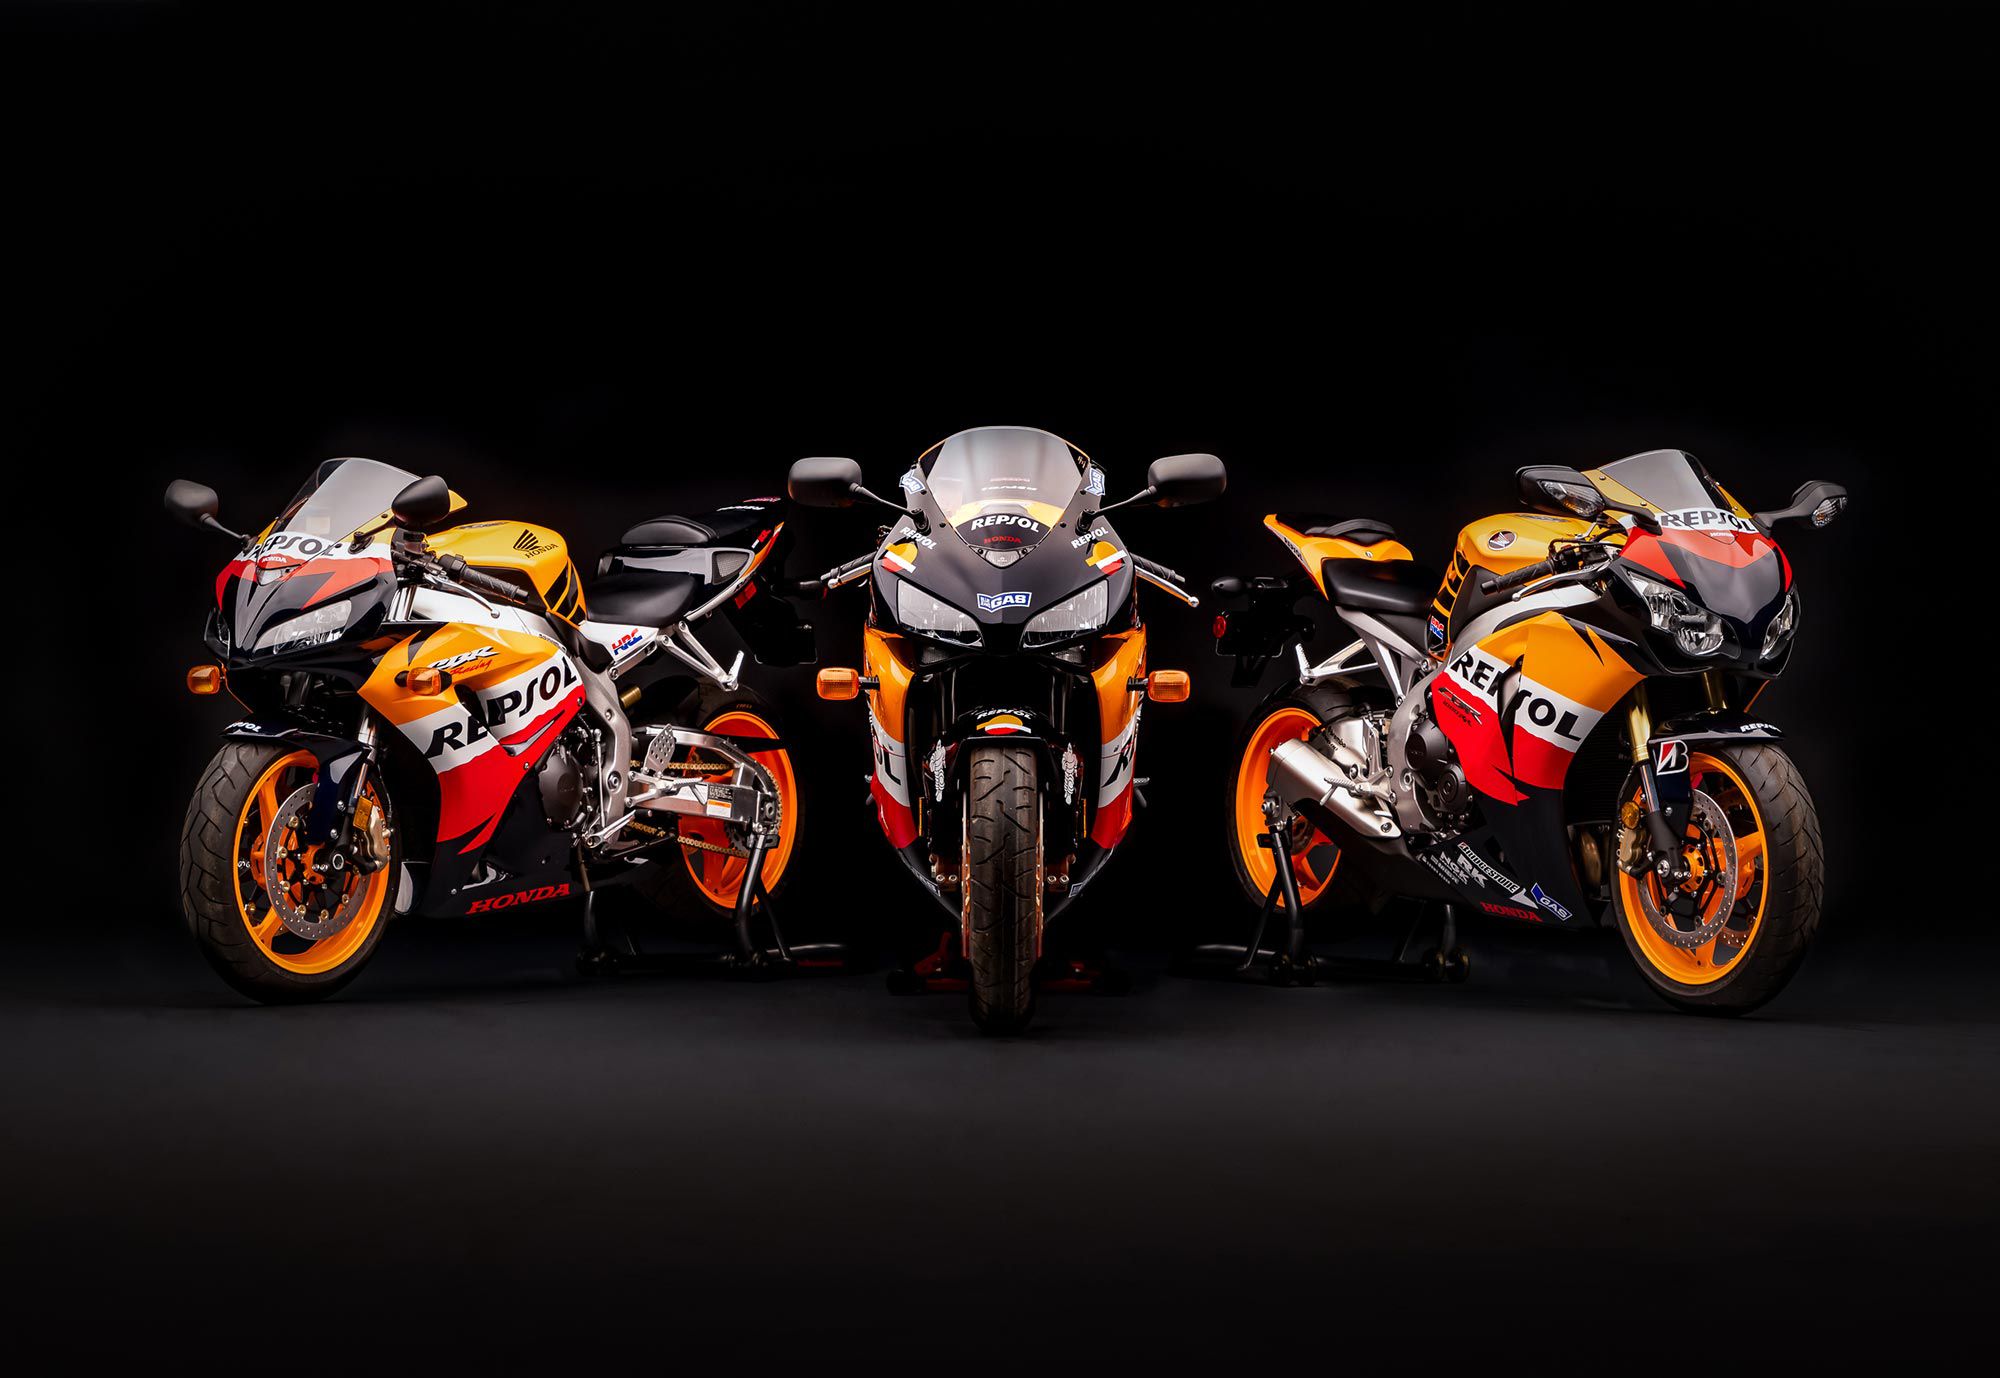 Three bikes on auction, with all proceeds going to the Pediatric Brain Tumor Foundation.